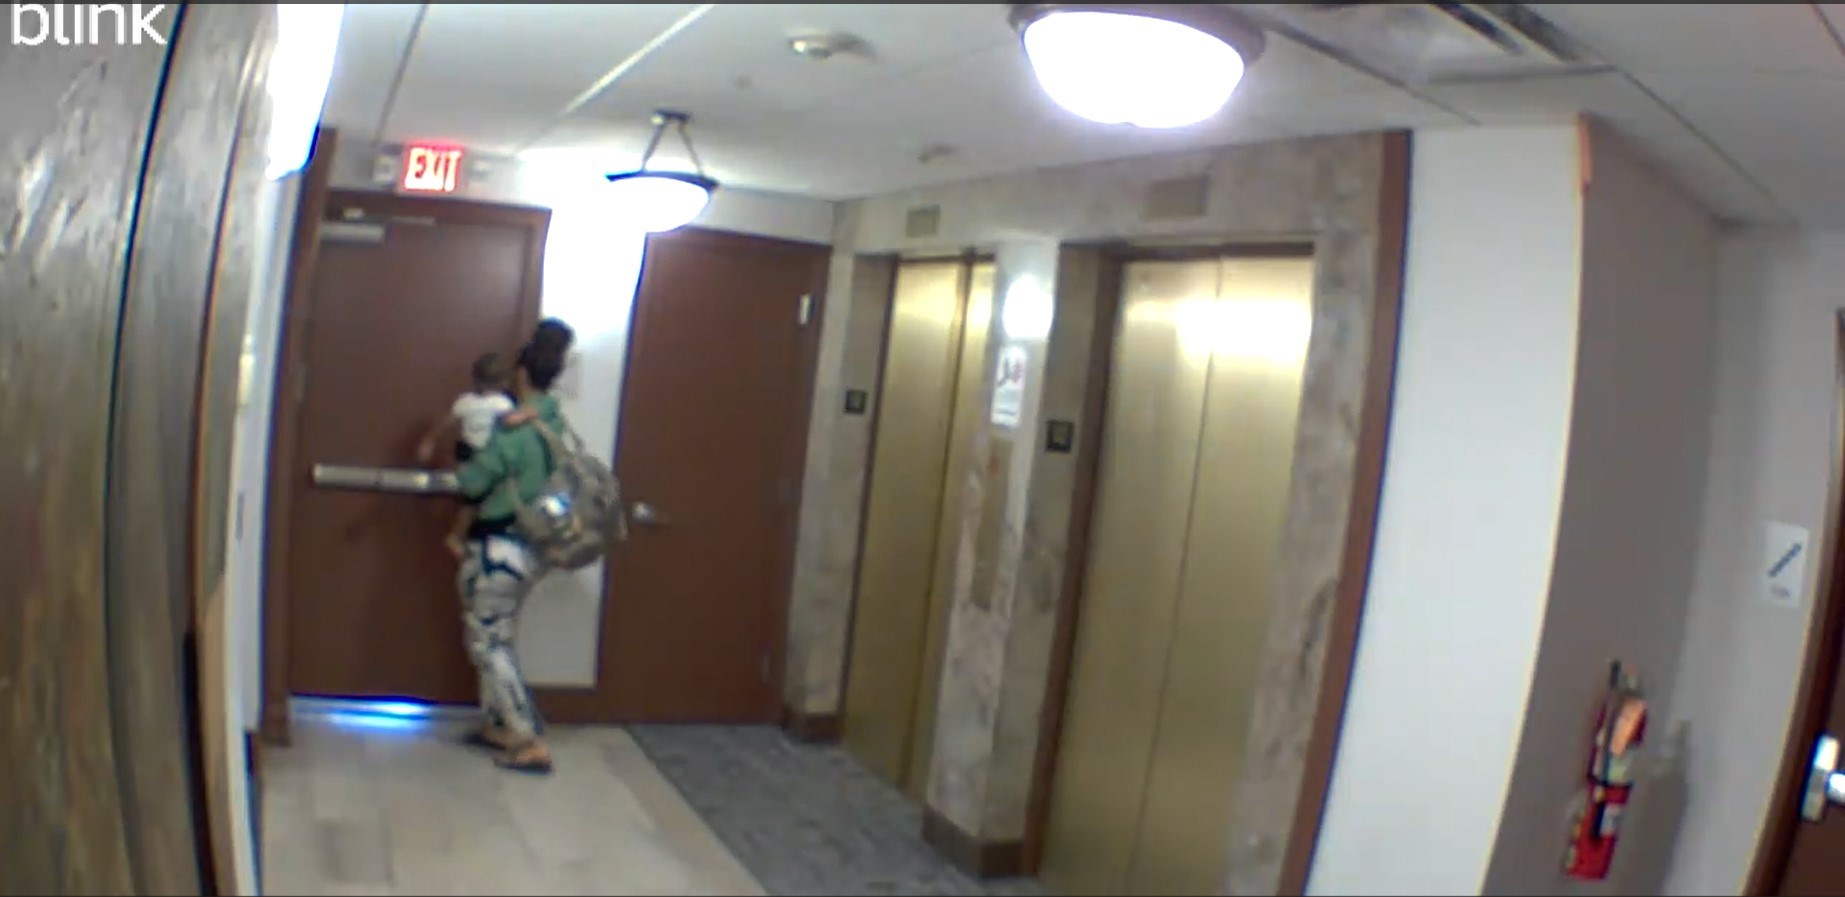 A woman narrowly escapes the building with her baby